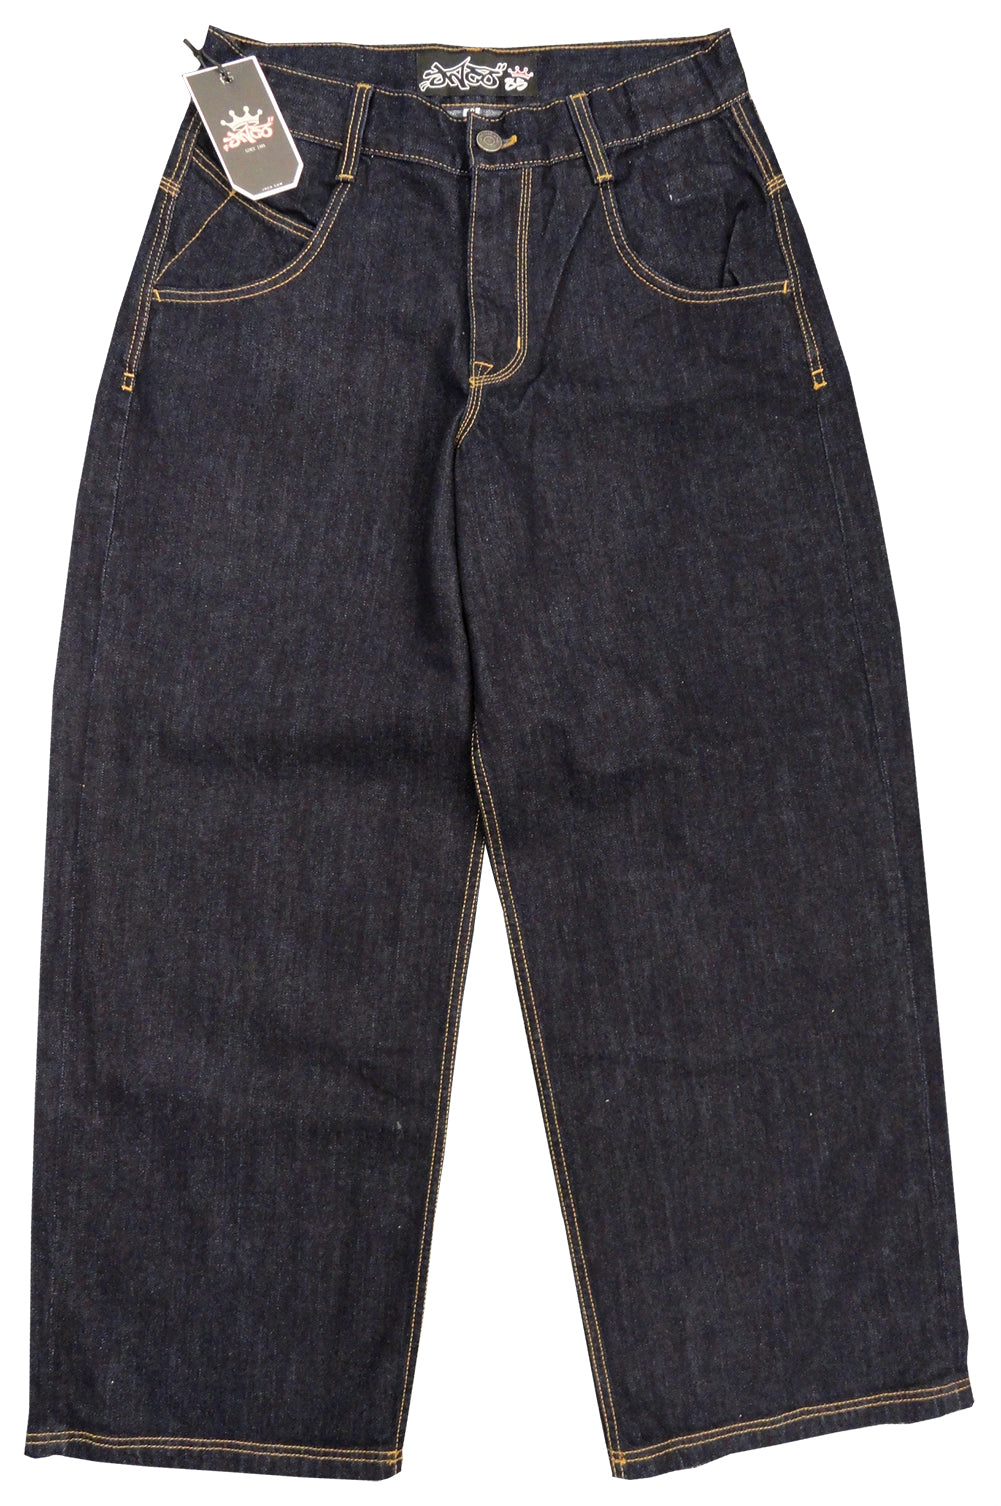 JNCO Jeans - JNCO Half Pipes Jeans (Rinse Wash) – Bewild